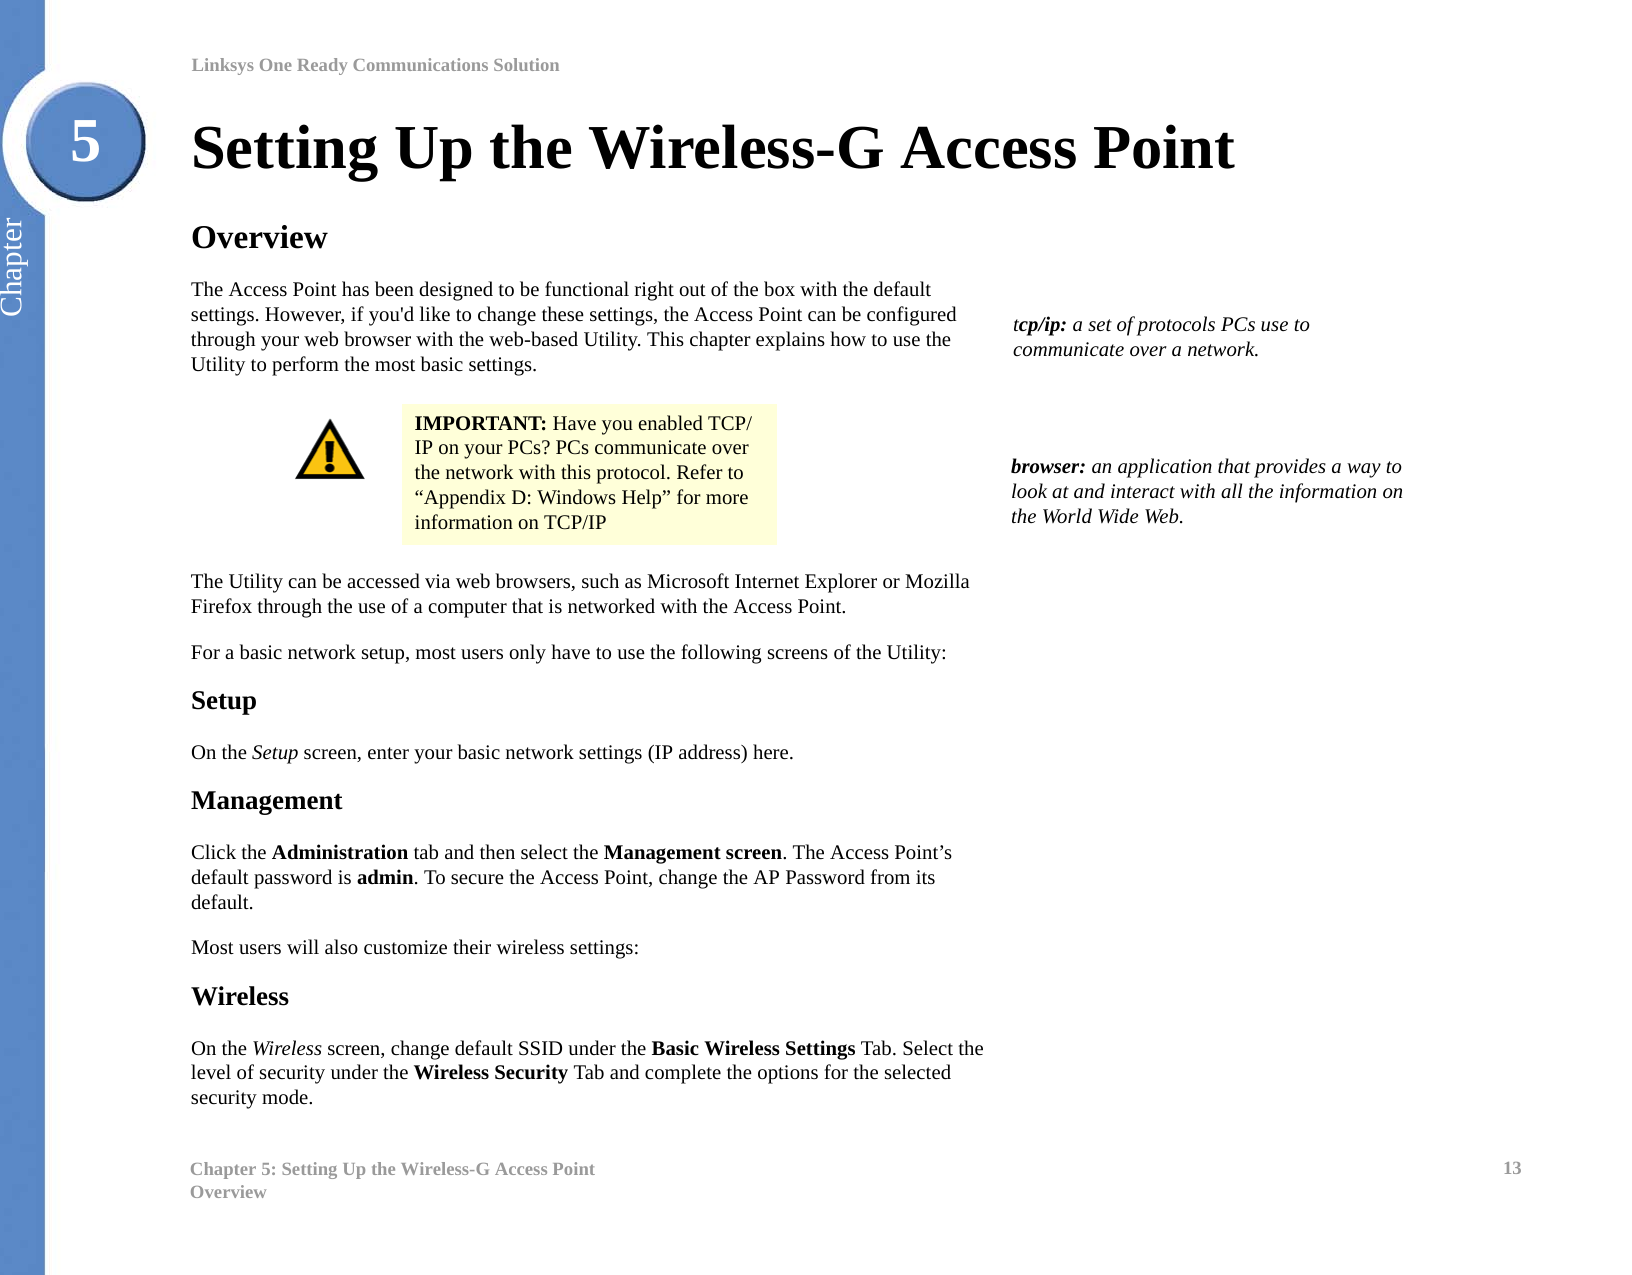 13Chapter 5: Setting Up the Wireless-G Access PointOverviewLinksys One Ready Communications SolutionChapter5Setting Up the Wireless-G Access PointOverviewThe Access Point has been designed to be functional right out of the box with the default settings. However, if you&apos;d like to change these settings, the Access Point can be configured through your web browser with the web-based Utility. This chapter explains how to use the Utility to perform the most basic settings.The Utility can be accessed via web browsers, such as Microsoft Internet Explorer or Mozilla Firefox through the use of a computer that is networked with the Access Point.For a basic network setup, most users only have to use the following screens of the Utility:SetupOn the Setup screen, enter your basic network settings (IP address) here.ManagementClick the Administration tab and then select the Management screen. The Access Point’s default password is admin. To secure the Access Point, change the AP Password from its default.Most users will also customize their wireless settings:WirelessOn the Wireless screen, change default SSID under the Basic Wireless Settings Tab. Select the level of security under the Wireless Security Tab and complete the options for the selected security mode.IMPORTANT: Have you enabled TCP/IP on your PCs? PCs communicate over the network with this protocol. Refer to “Appendix D: Windows Help” for more information on TCP/IPtcp/ip: a set of protocols PCs use to communicate over a network.browser: an application that provides a way to look at and interact with all the information on the World Wide Web. 